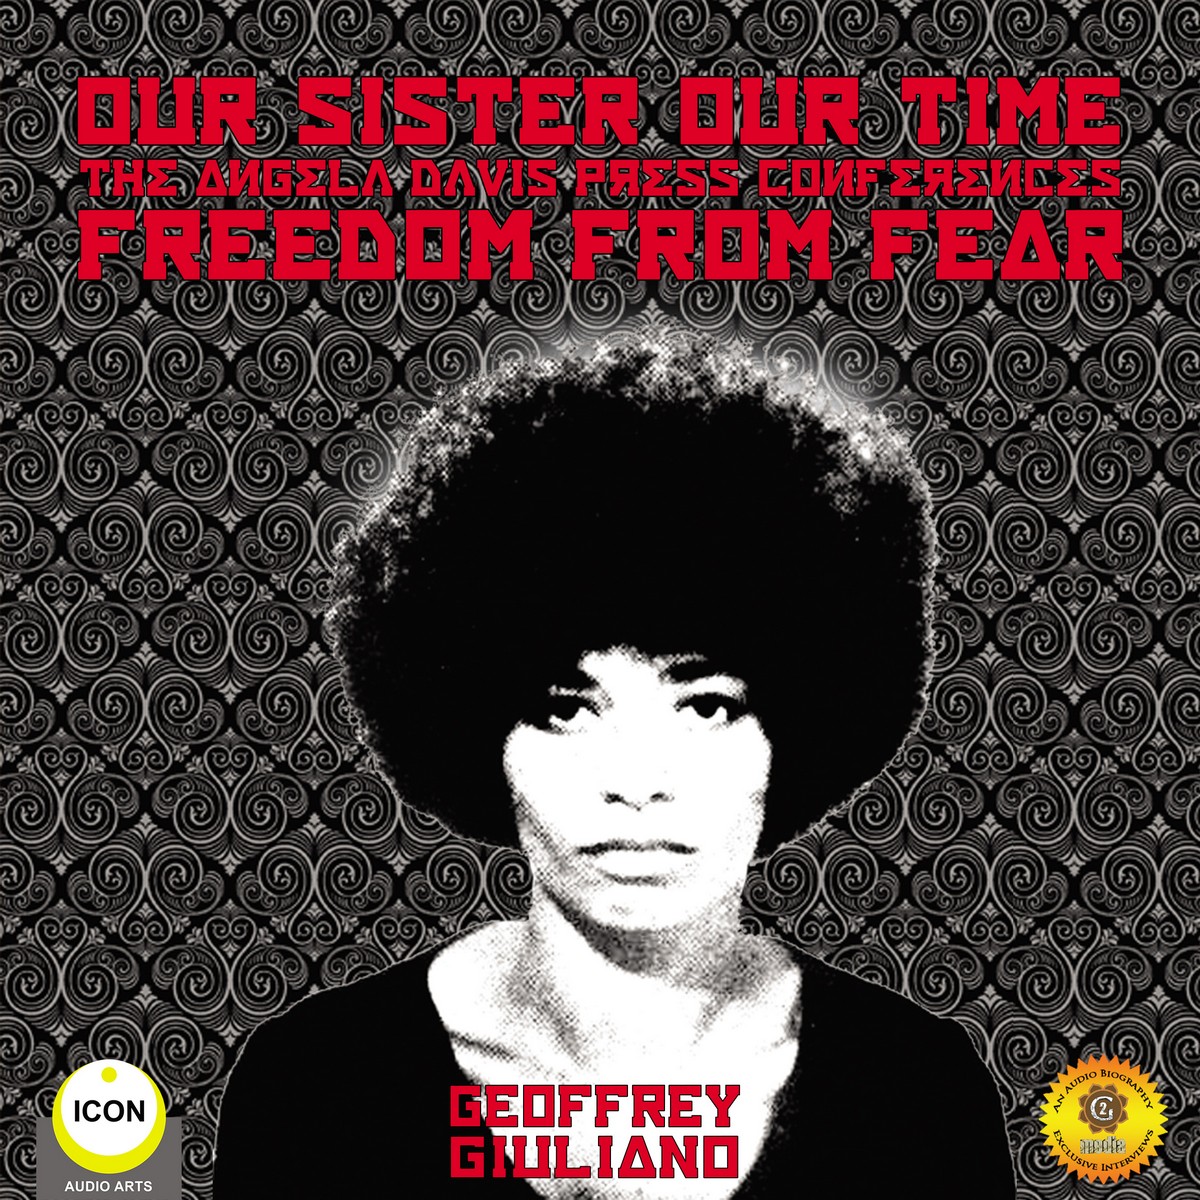 Our Sister Our Time Angela Davis – Freedom From Fear